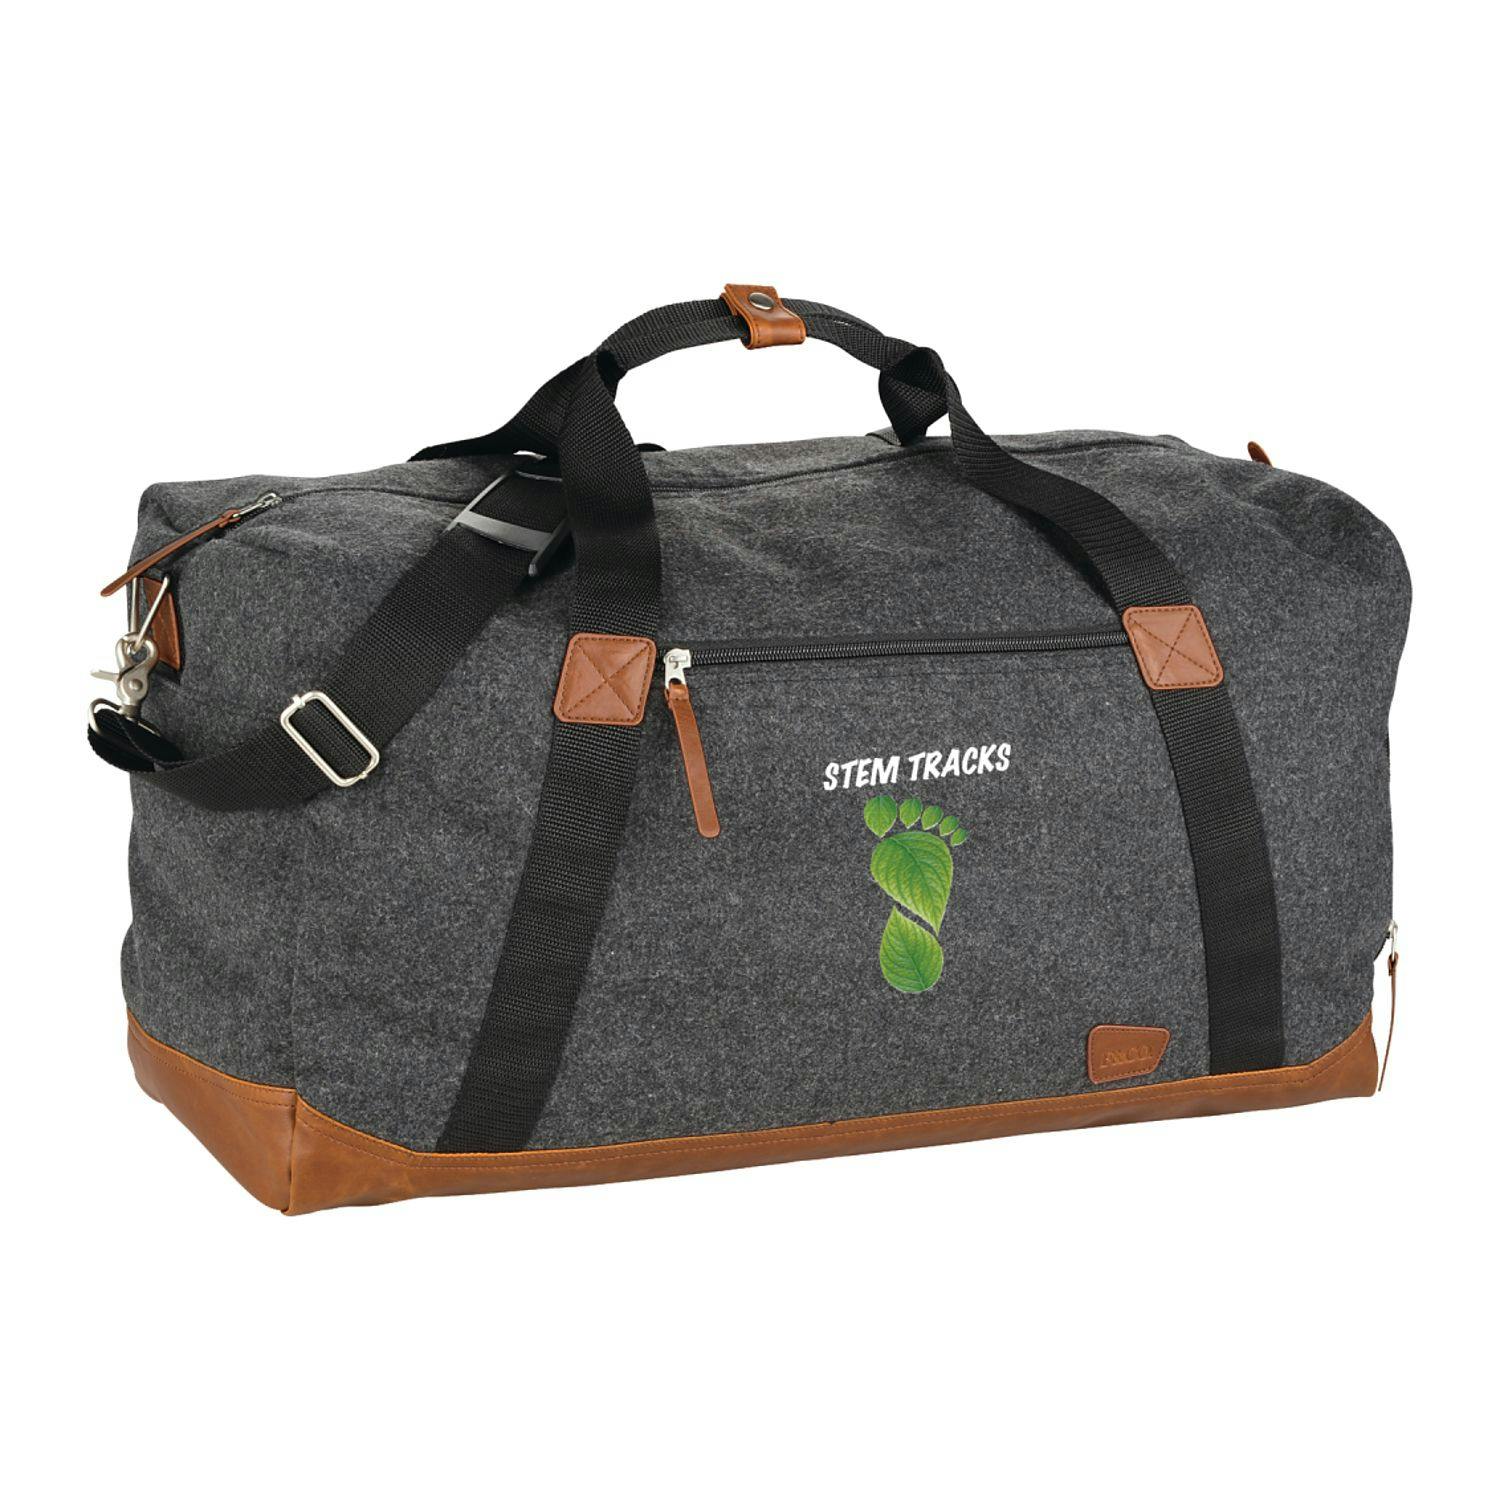 Field & Co.® Campster 22" Duffel Bag - additional Image 2